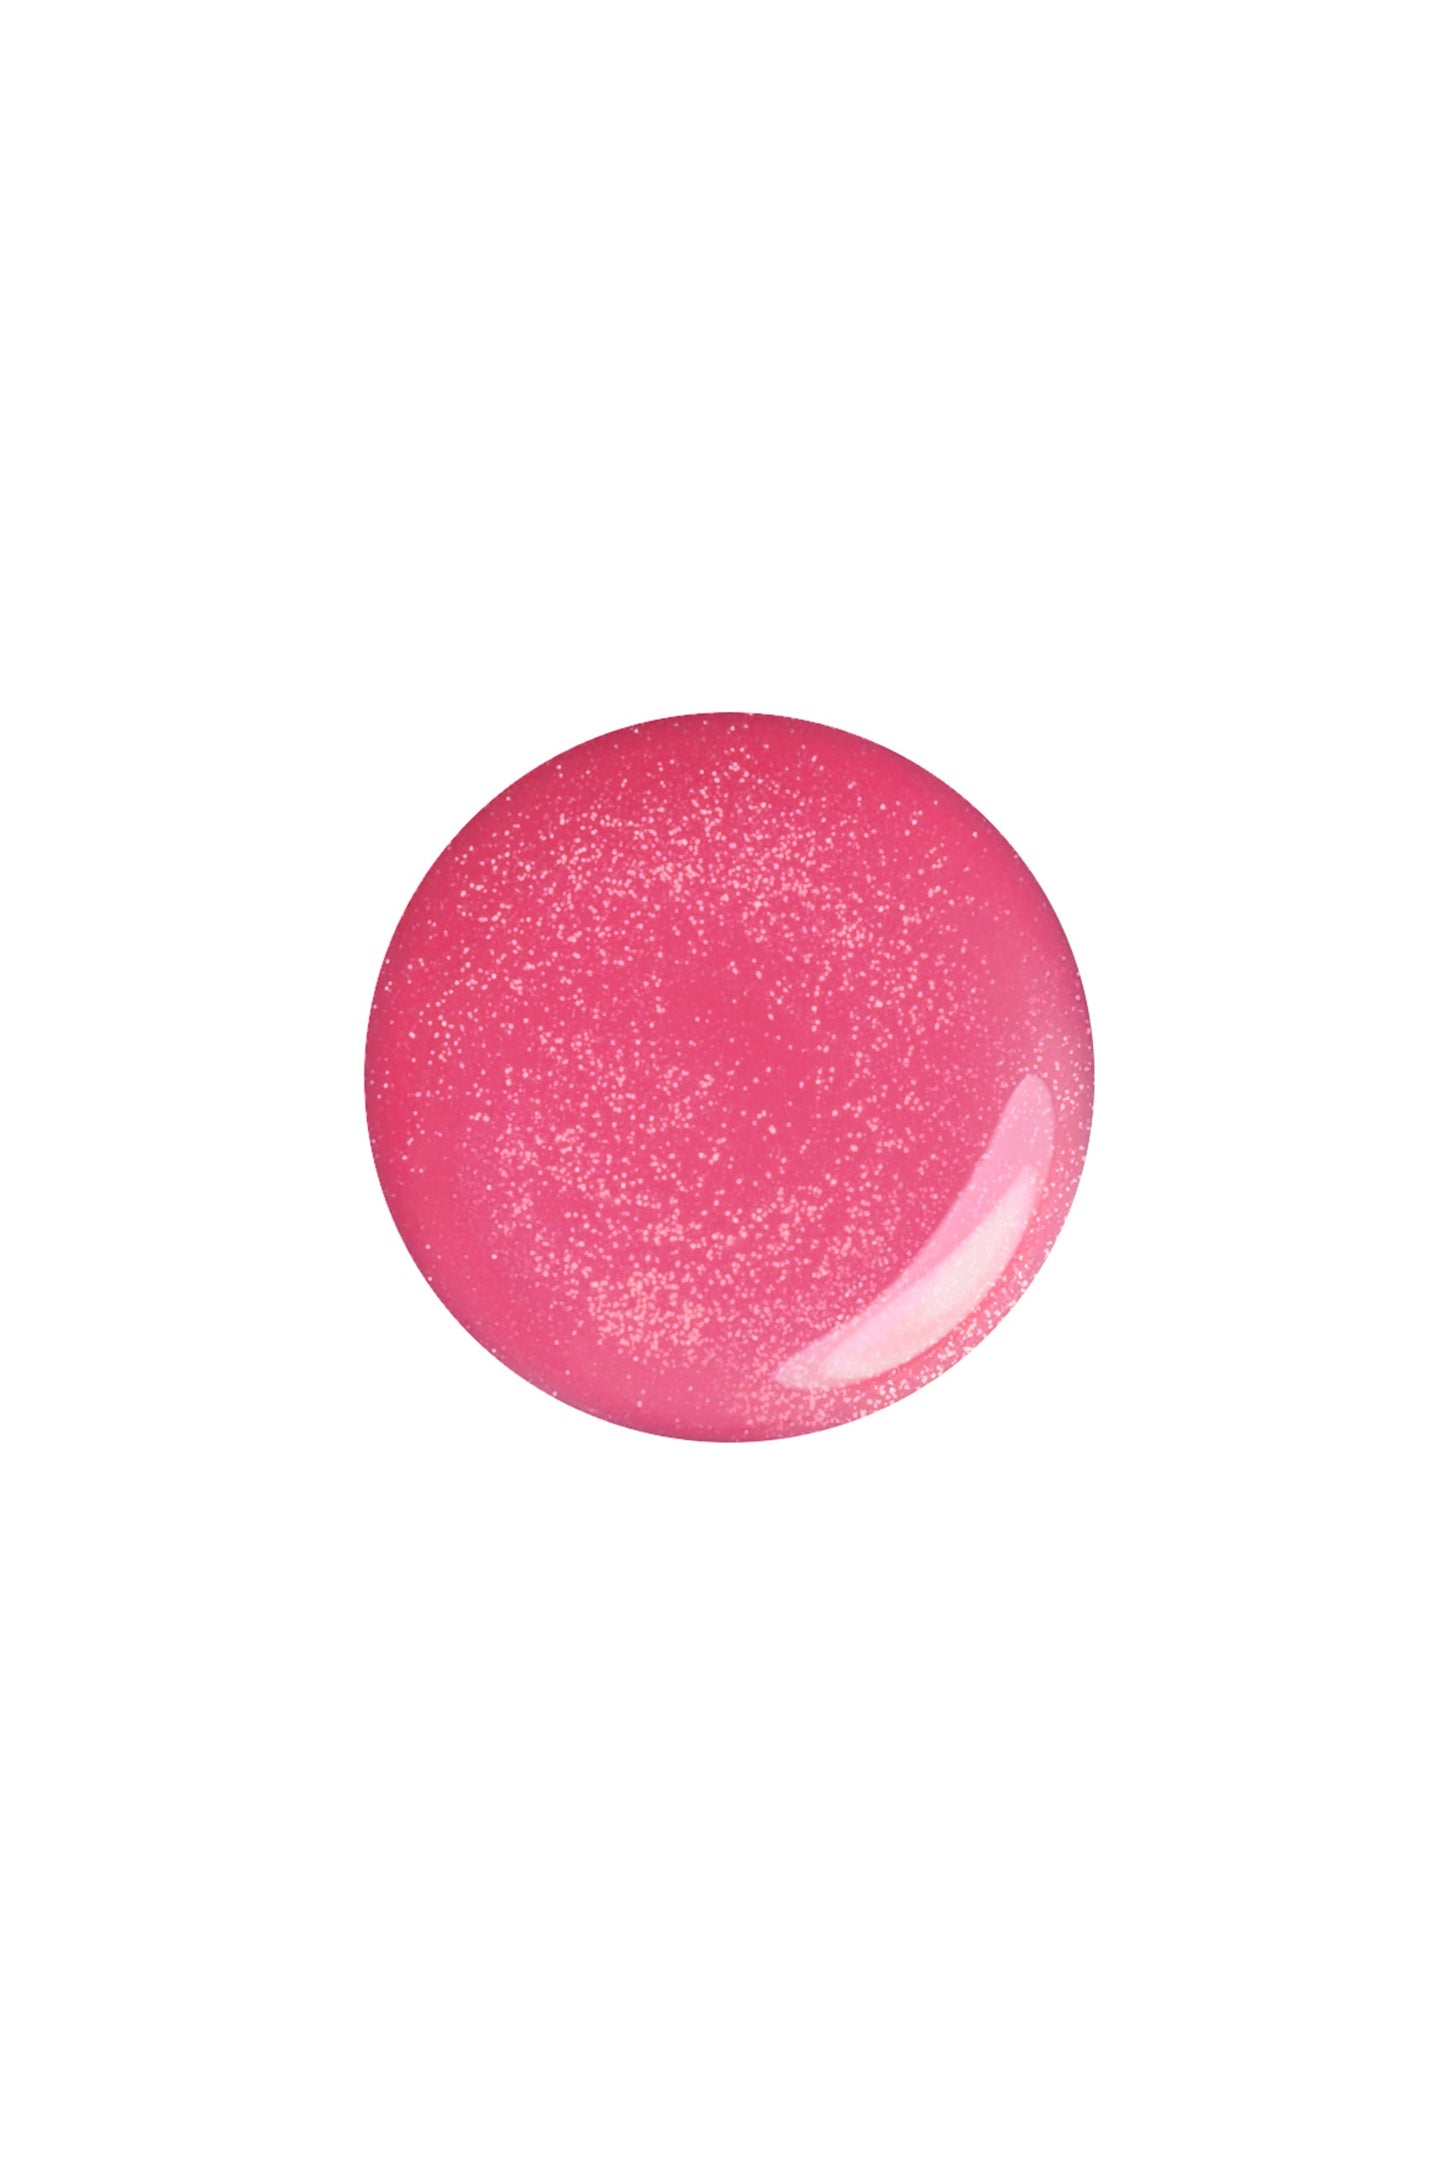 CHARMING PINK: a round button sample color